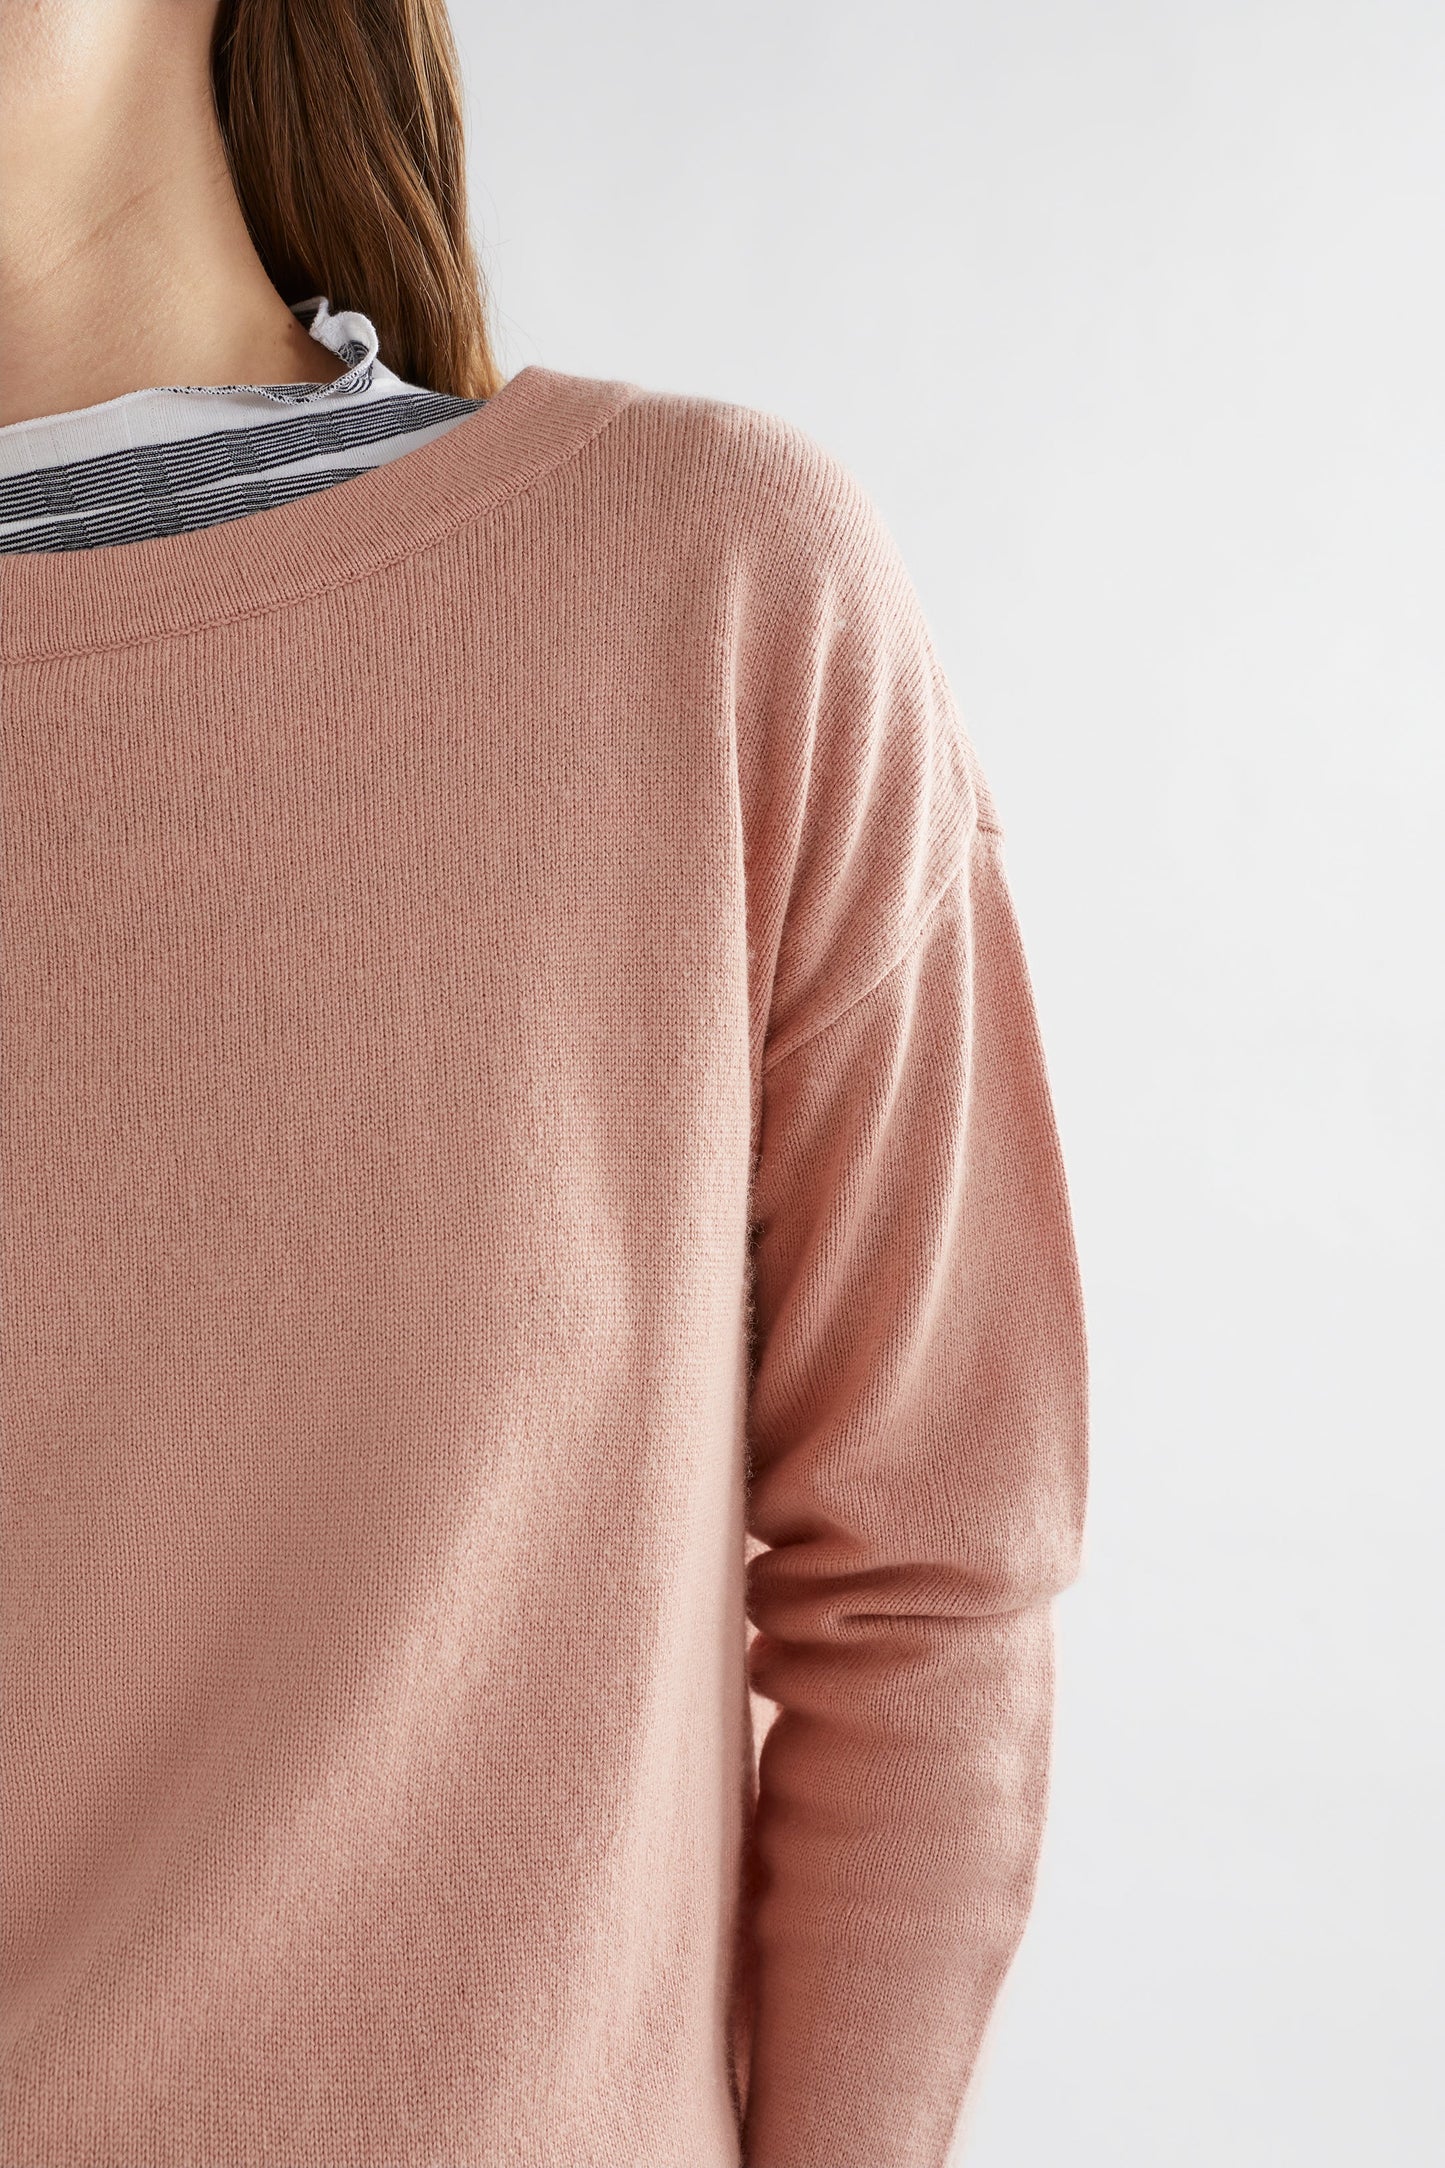 Kjosa Relaxed Fit A-line Sweater Model Detail | PEACH